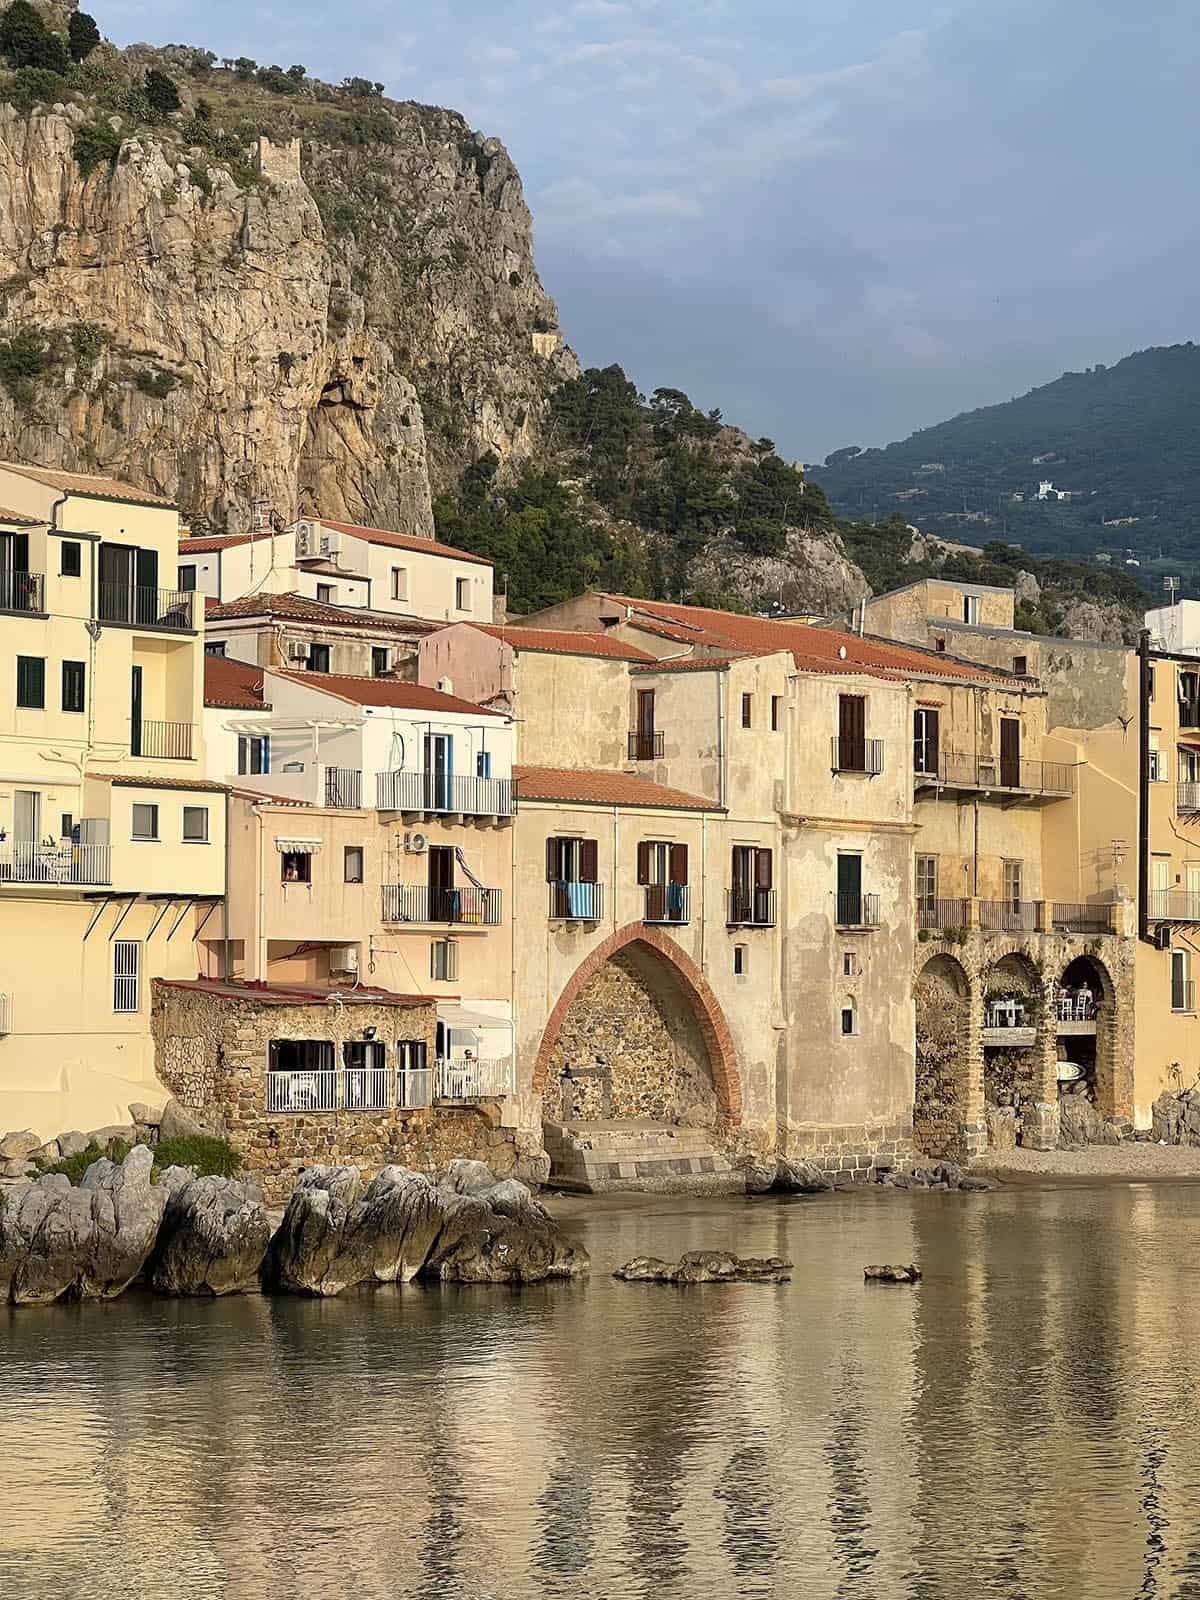 An image of the cliffside houses of Cefalu, Sicily as viewed from the pier. The water reflects the golden hues of the buildings